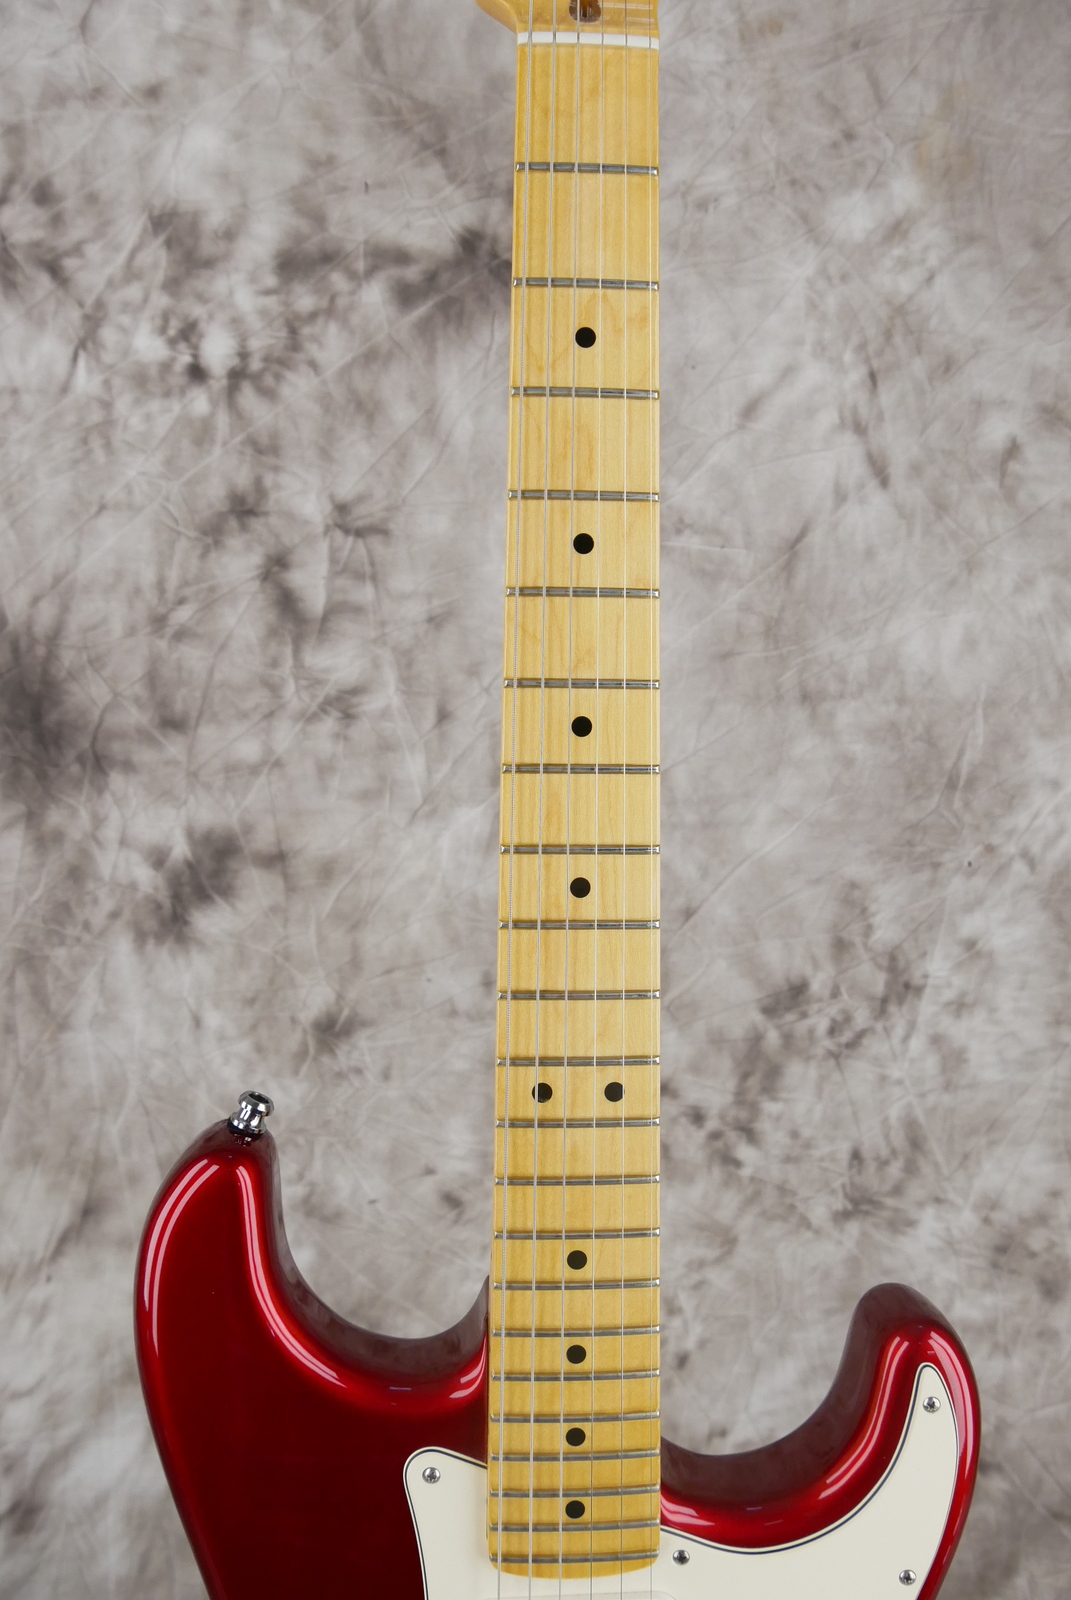 img/vintage/5279/Fender_Stratocaster_USA_built_from_parts_candy_apple_red_2015-011.JPG